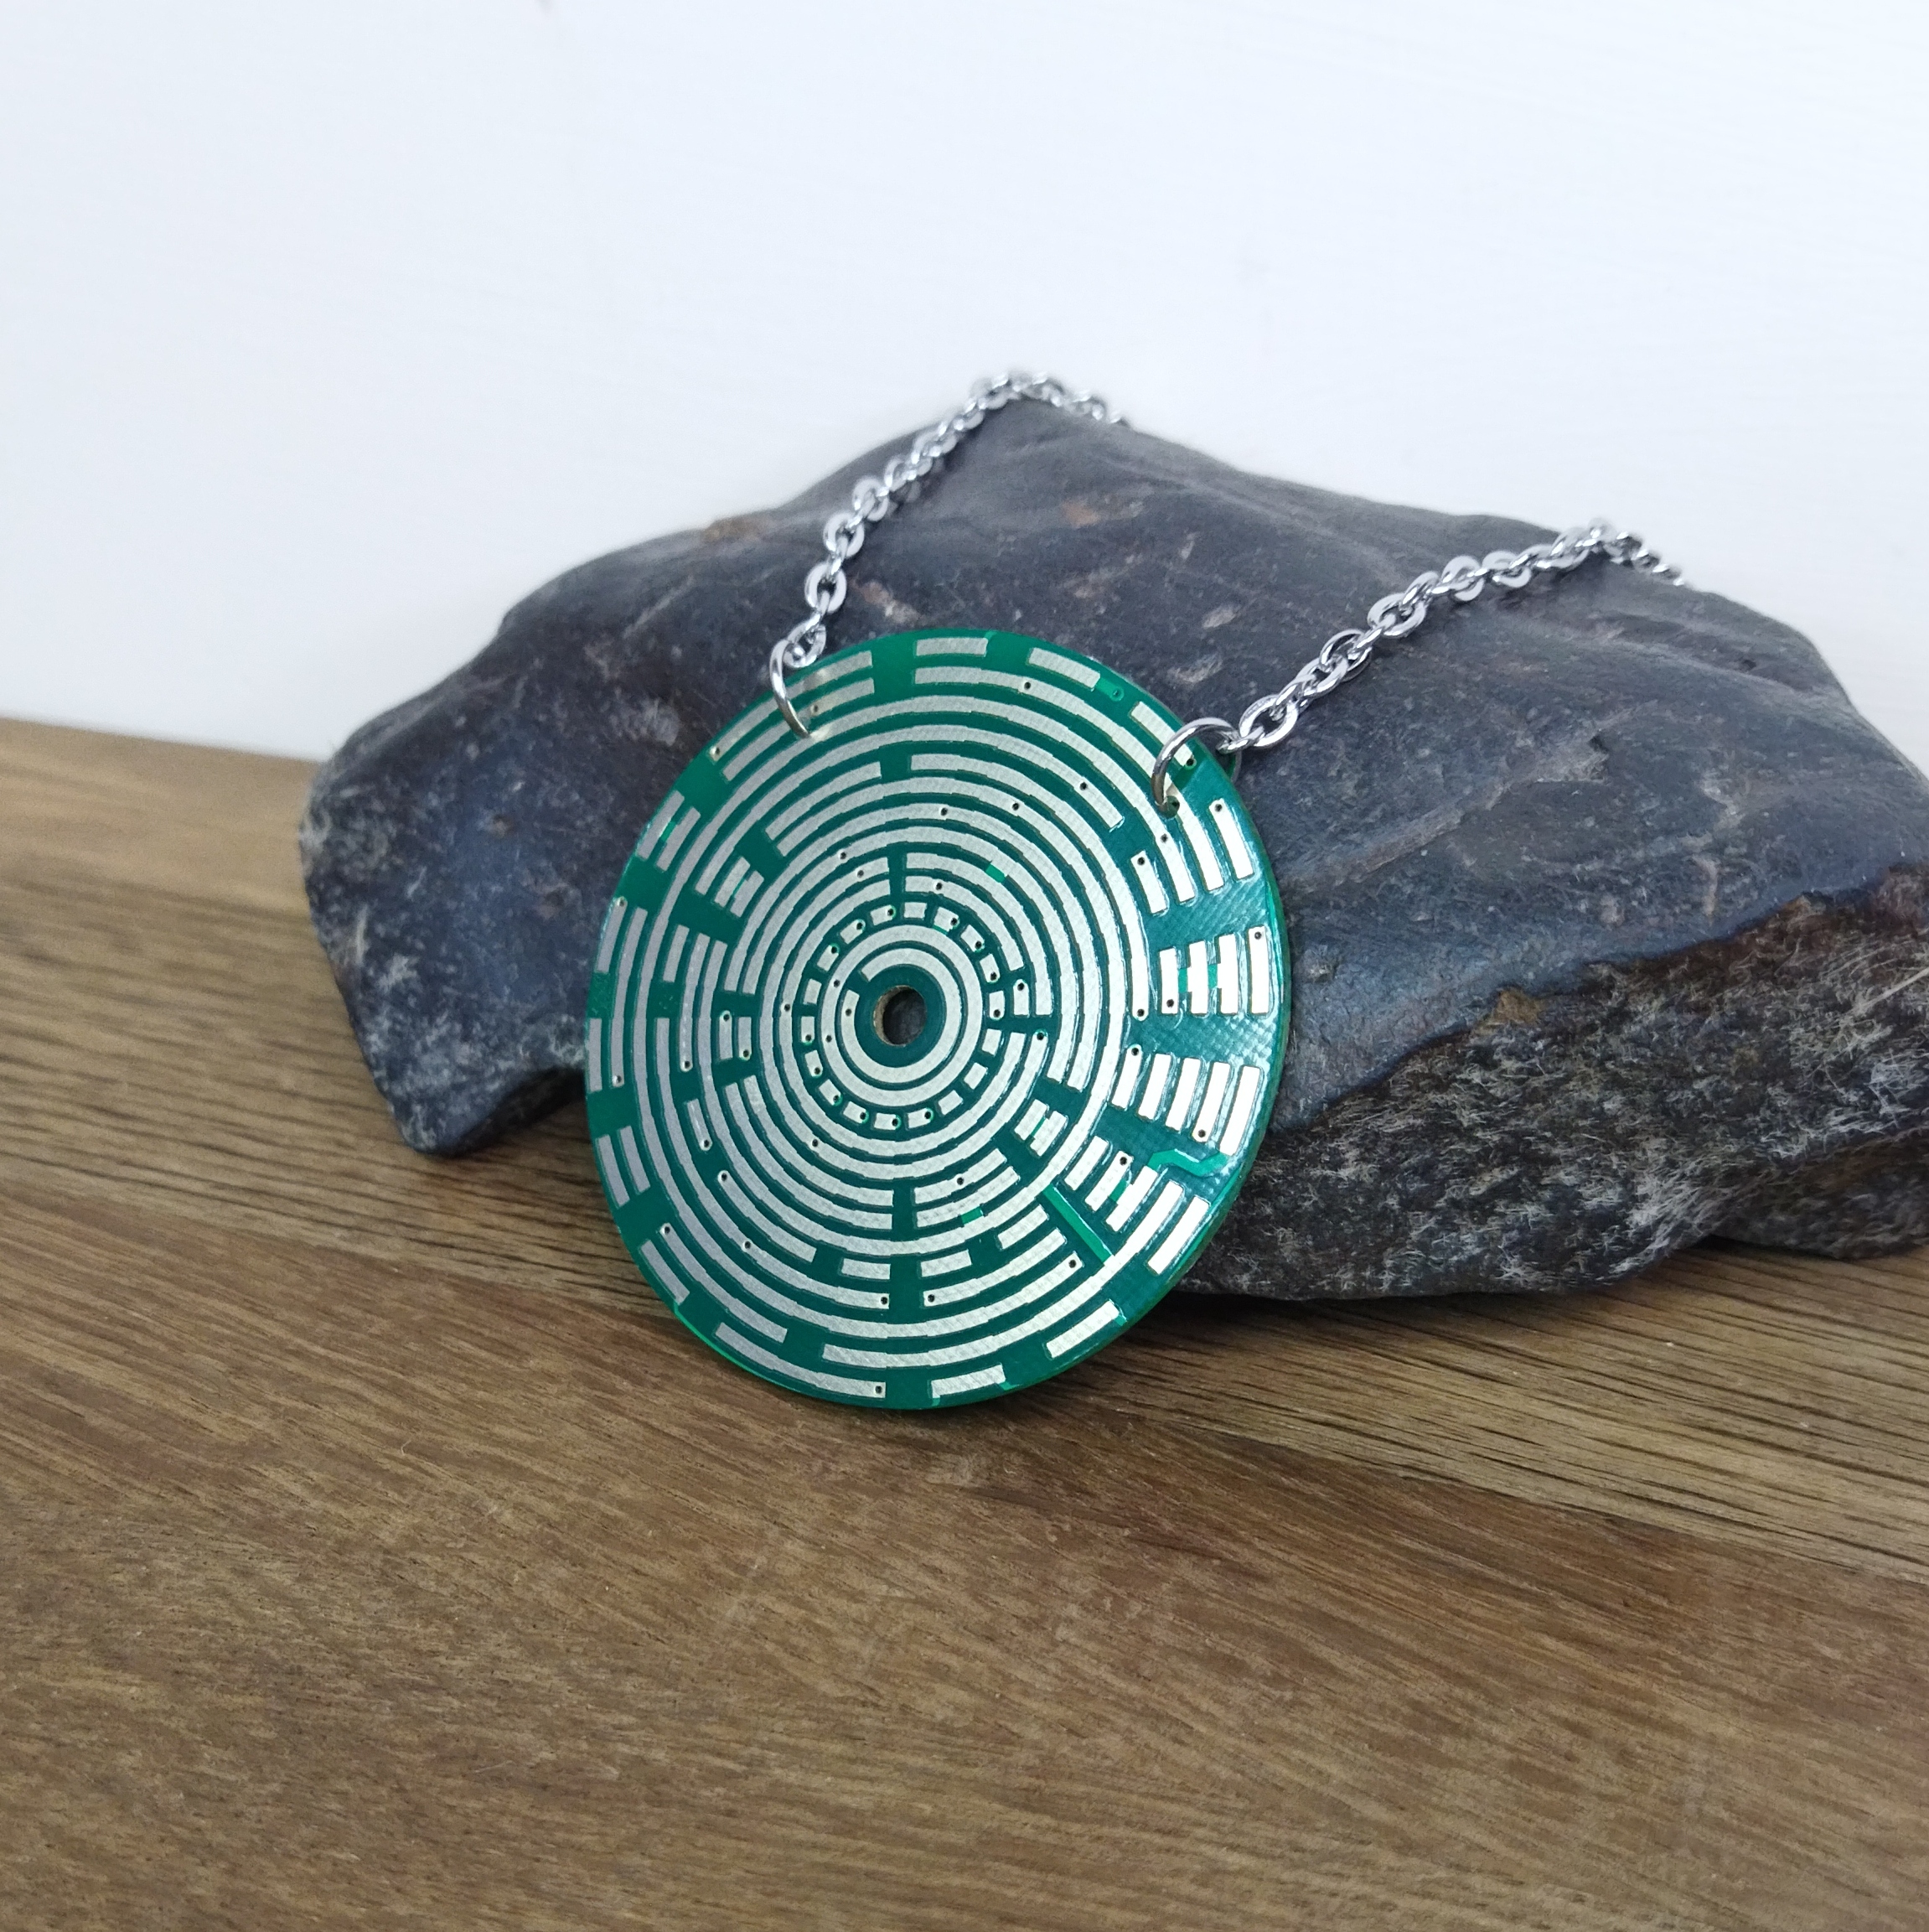 Circuit board necklace. Cyberpunk necklace with chain. Green circle futuristic pendant with chain